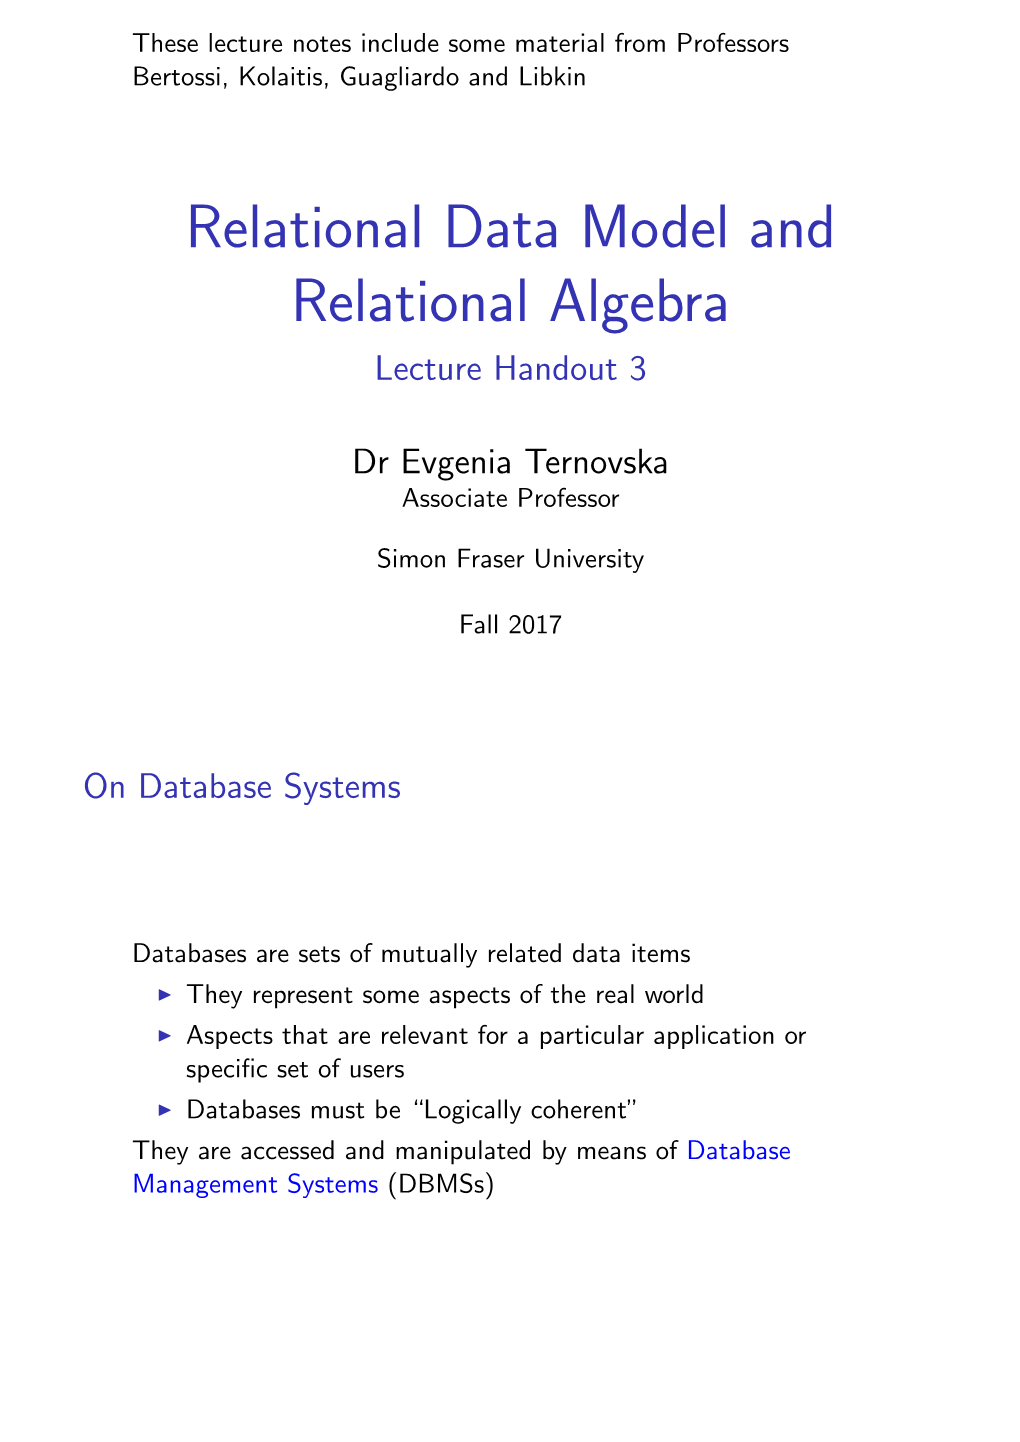 Relational Data Model and Relational Algebra Lecture Handout 3